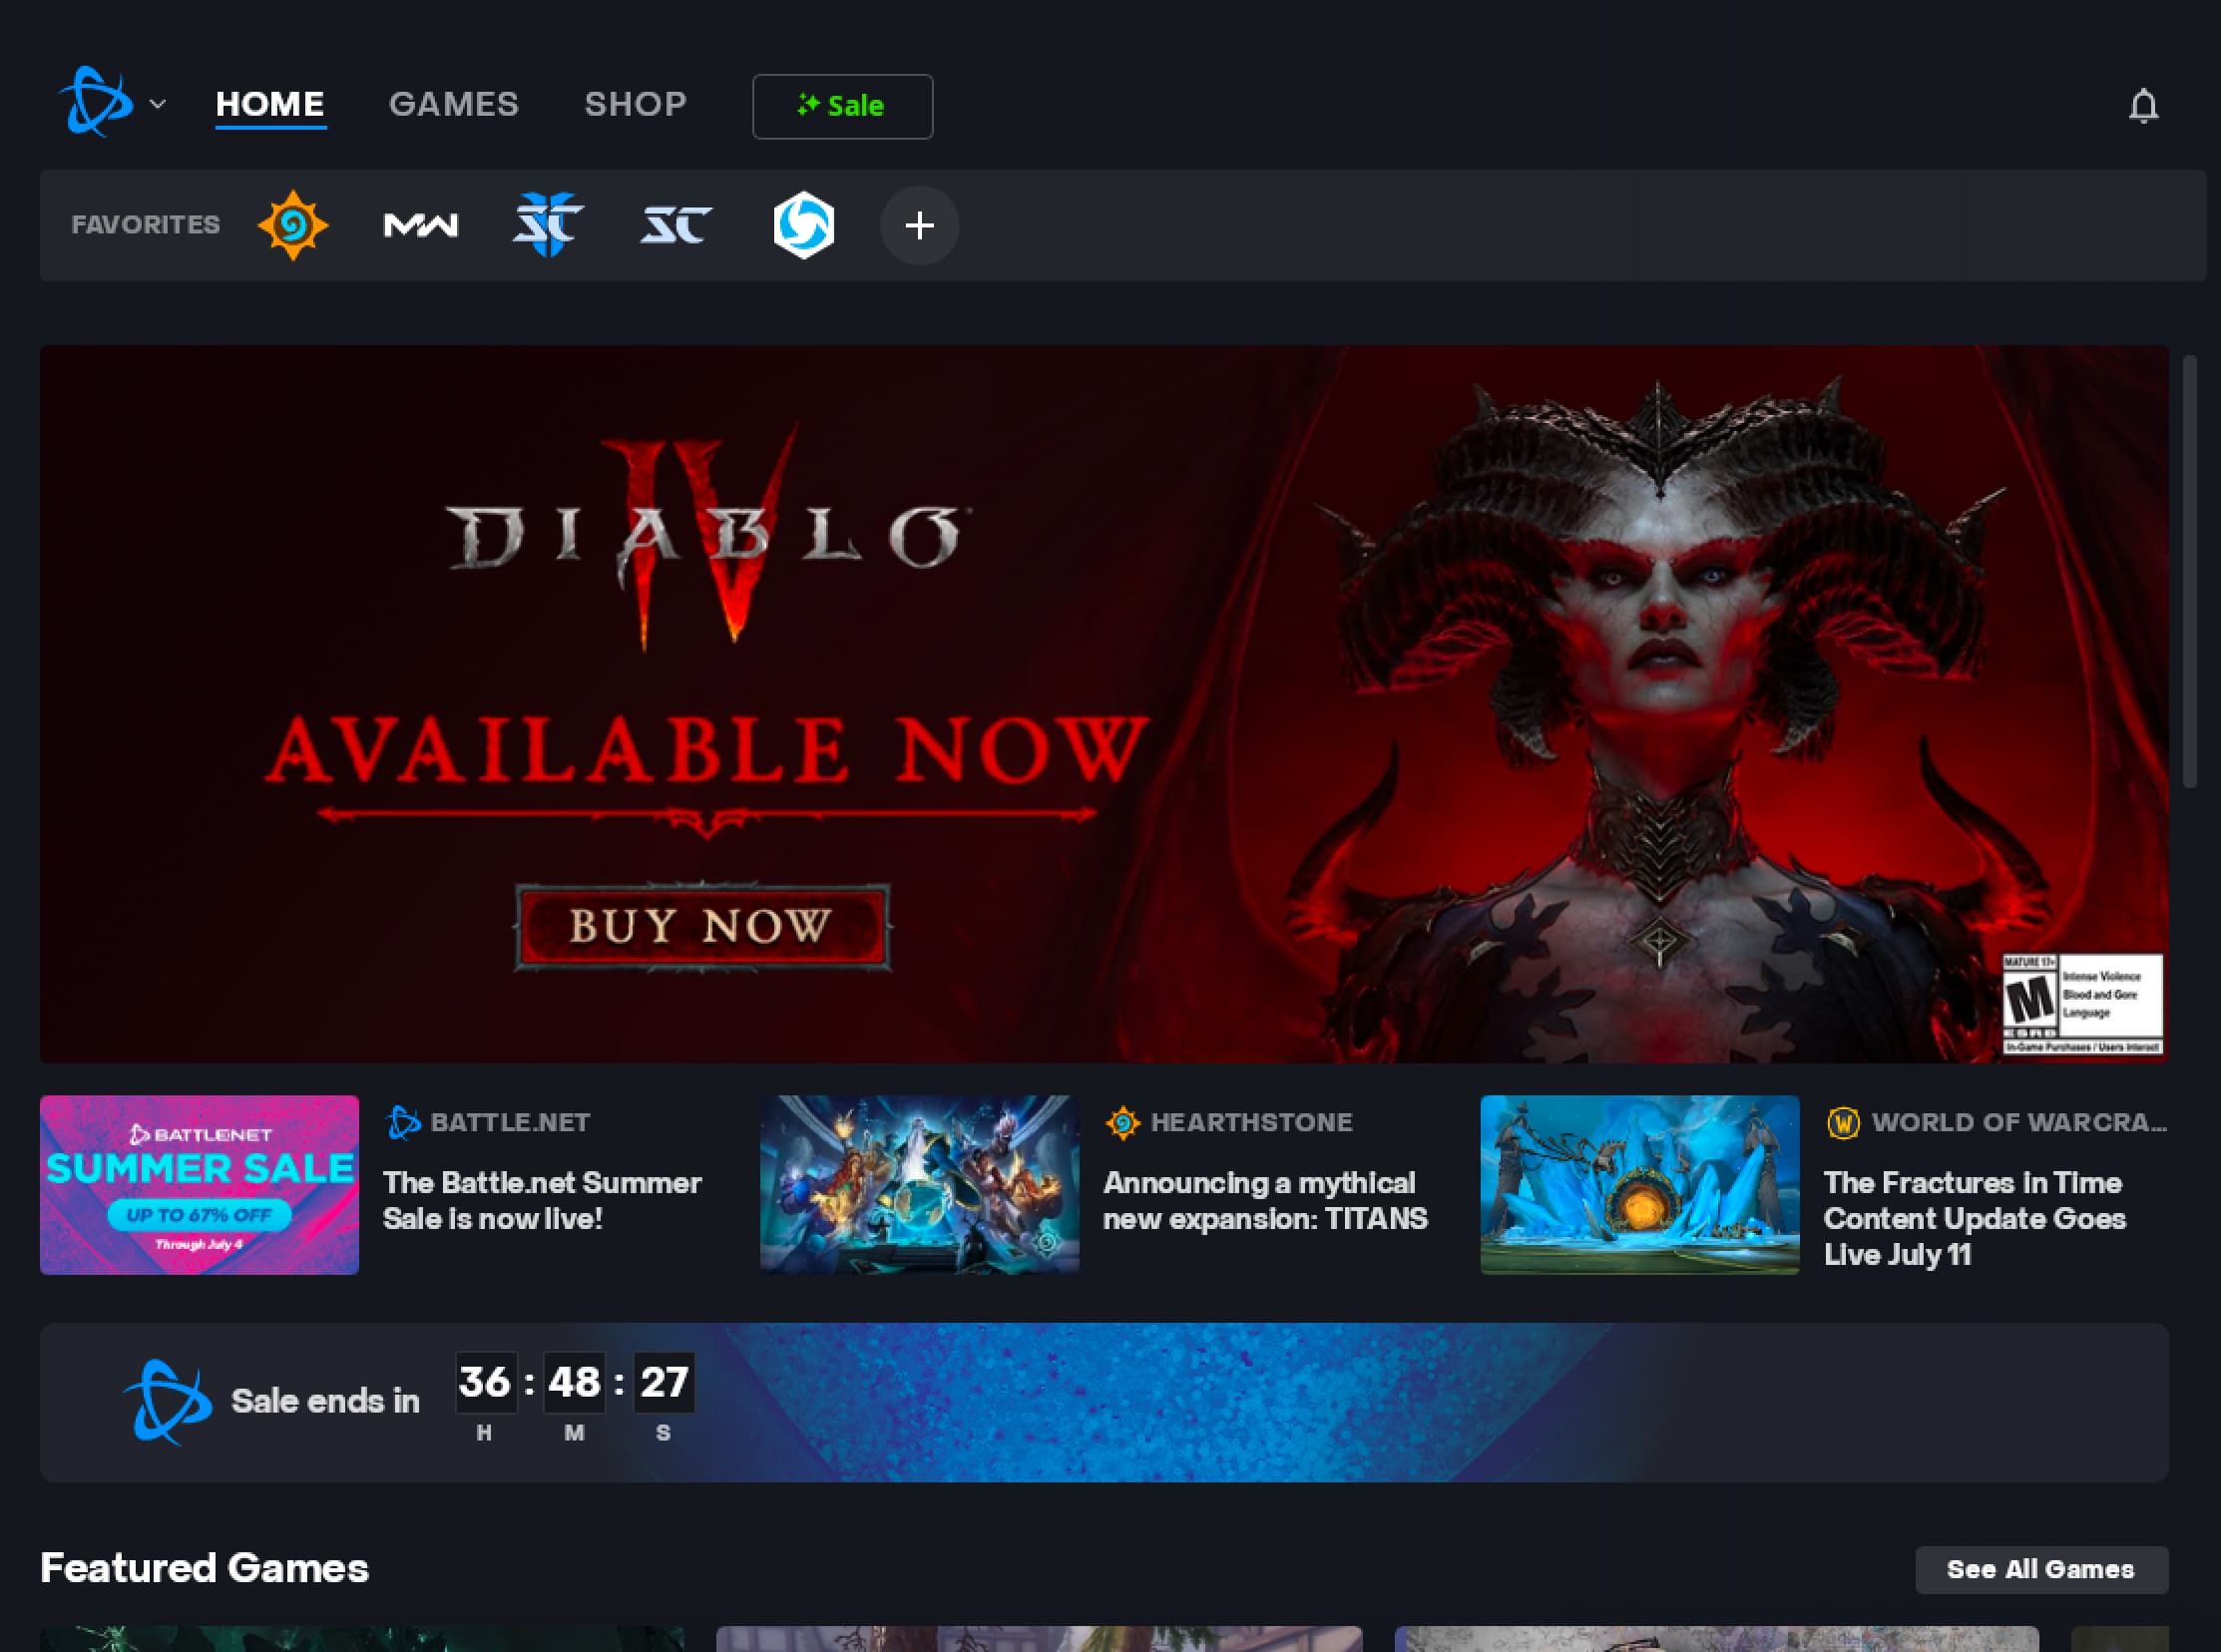 Battle.net to receive aesthetic, functional upgrade - Inven Global